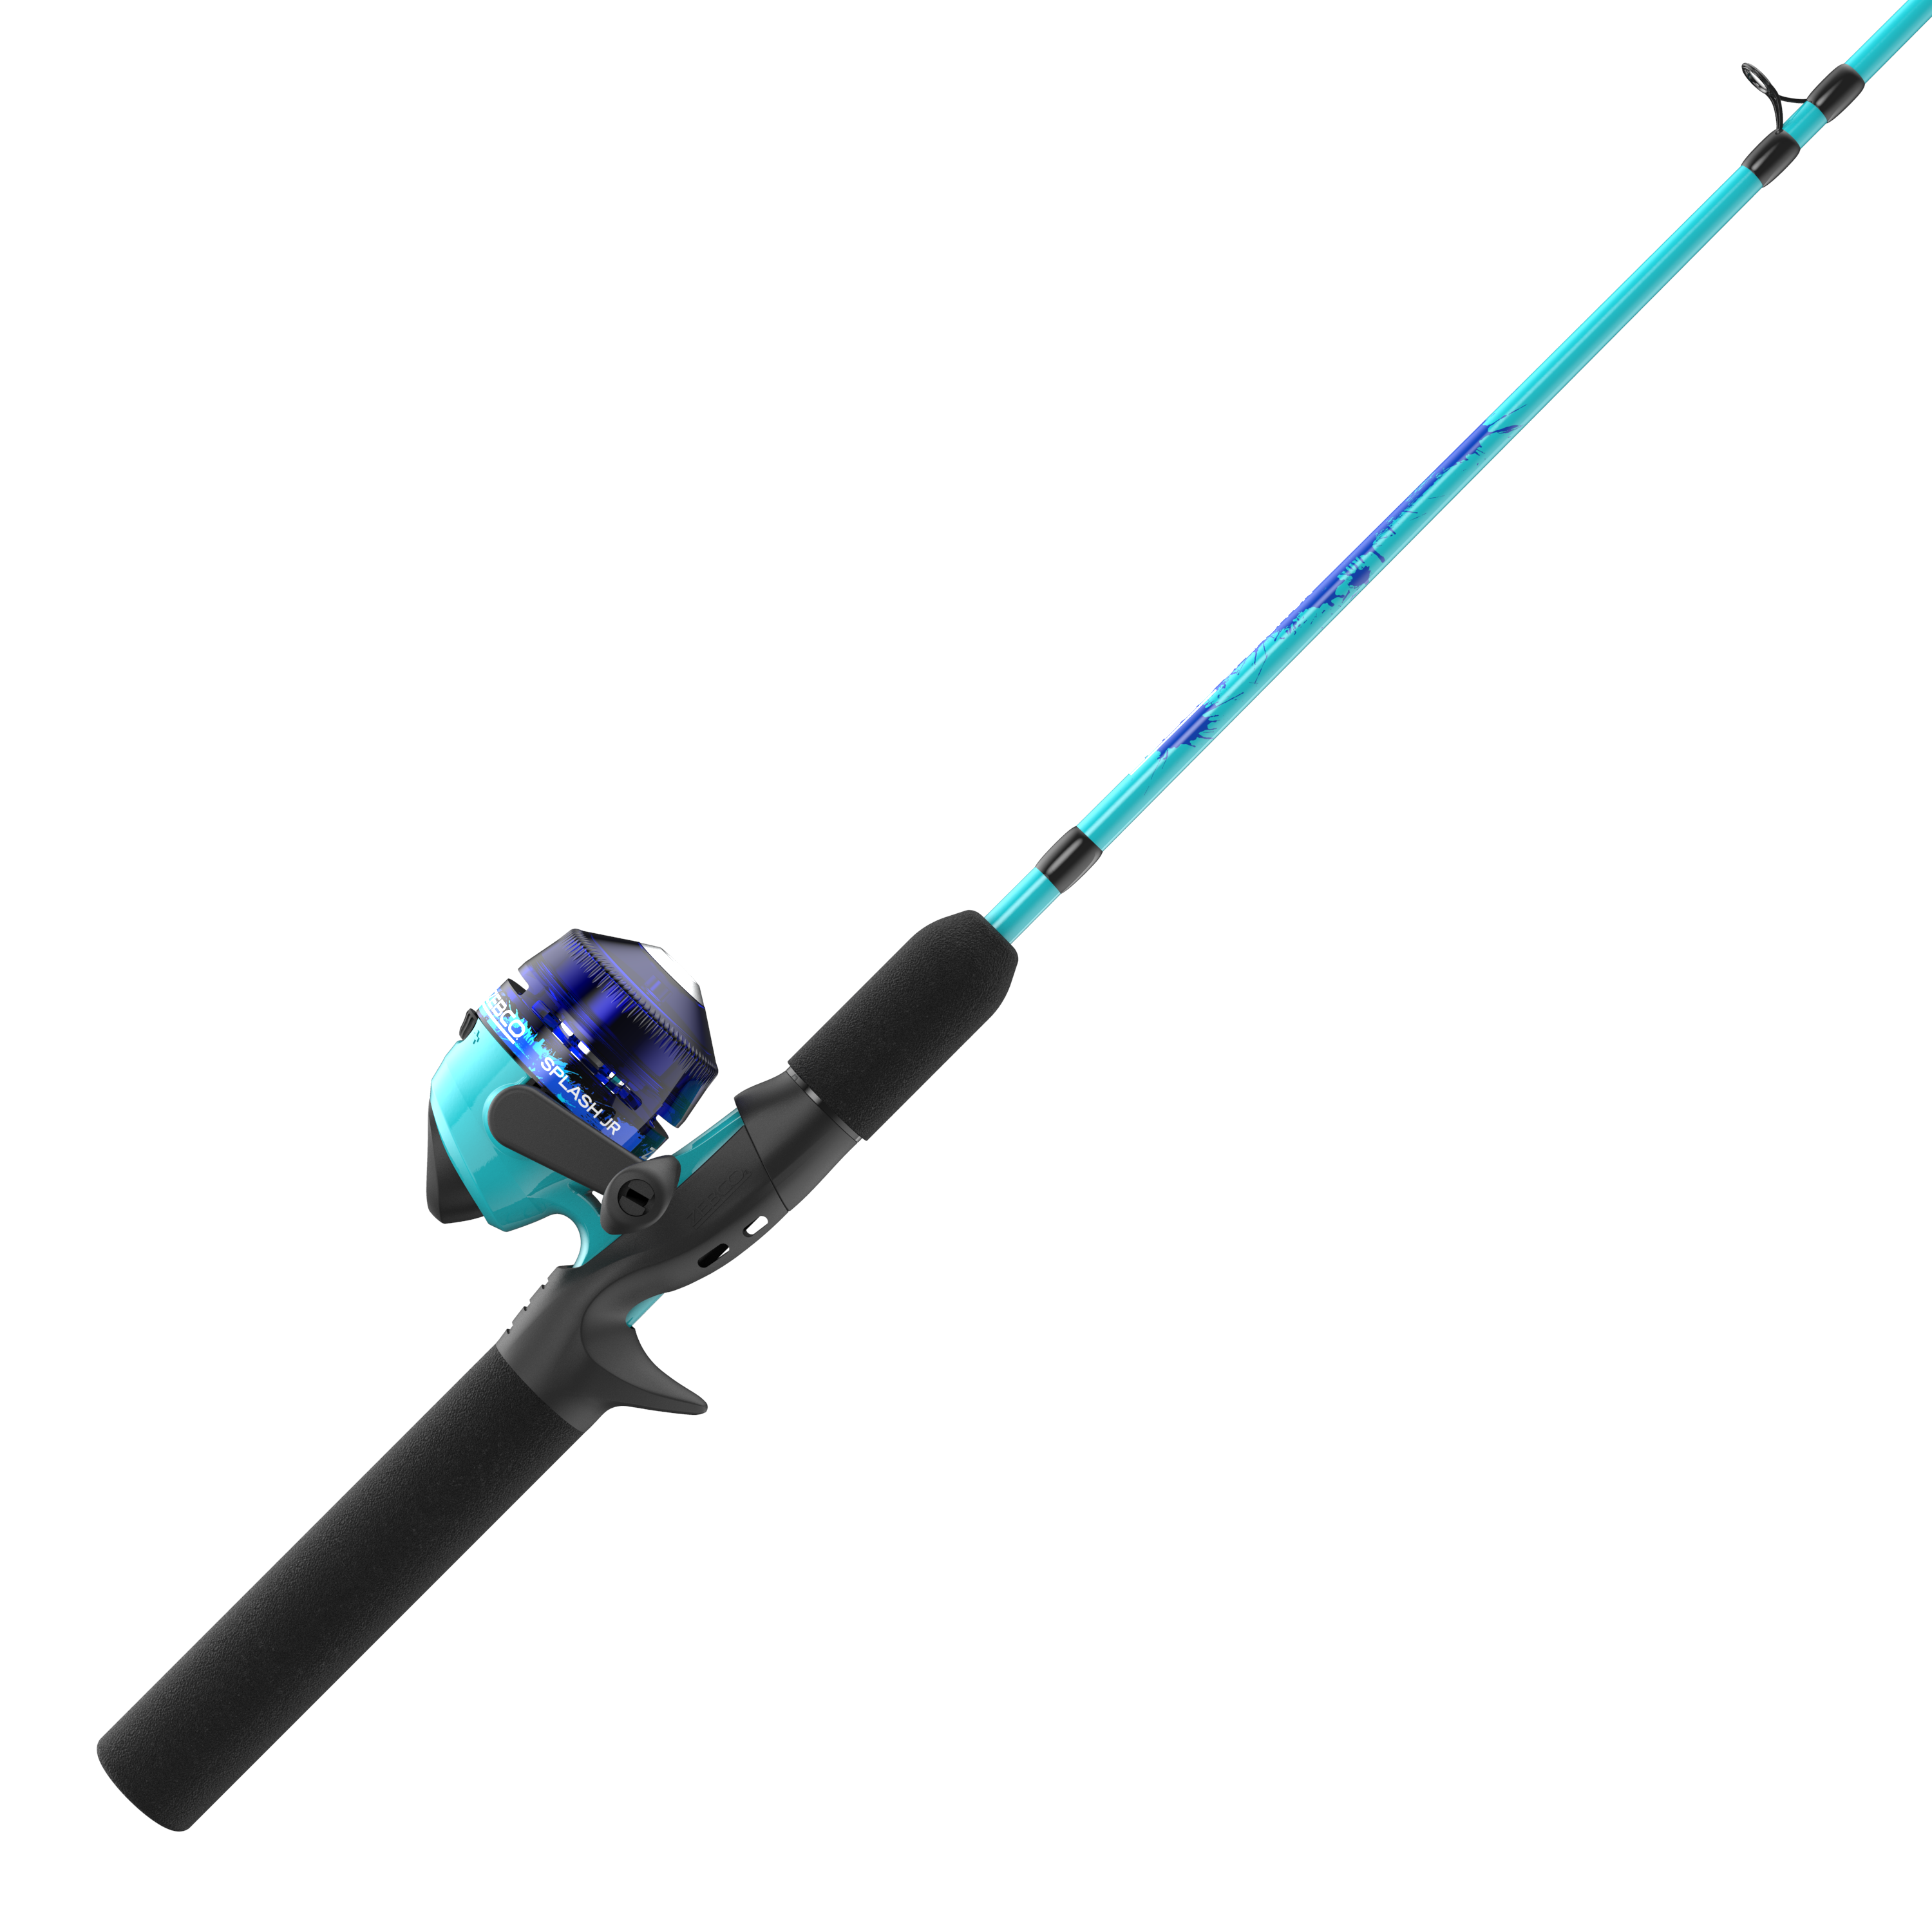 Kids Fishing Pole Kit Set，Portable Telescopic Fishing Rod and Reel Combo  Full Kits for Boys, Girls, Beginner, Youth, Spinning Combos -  Canada